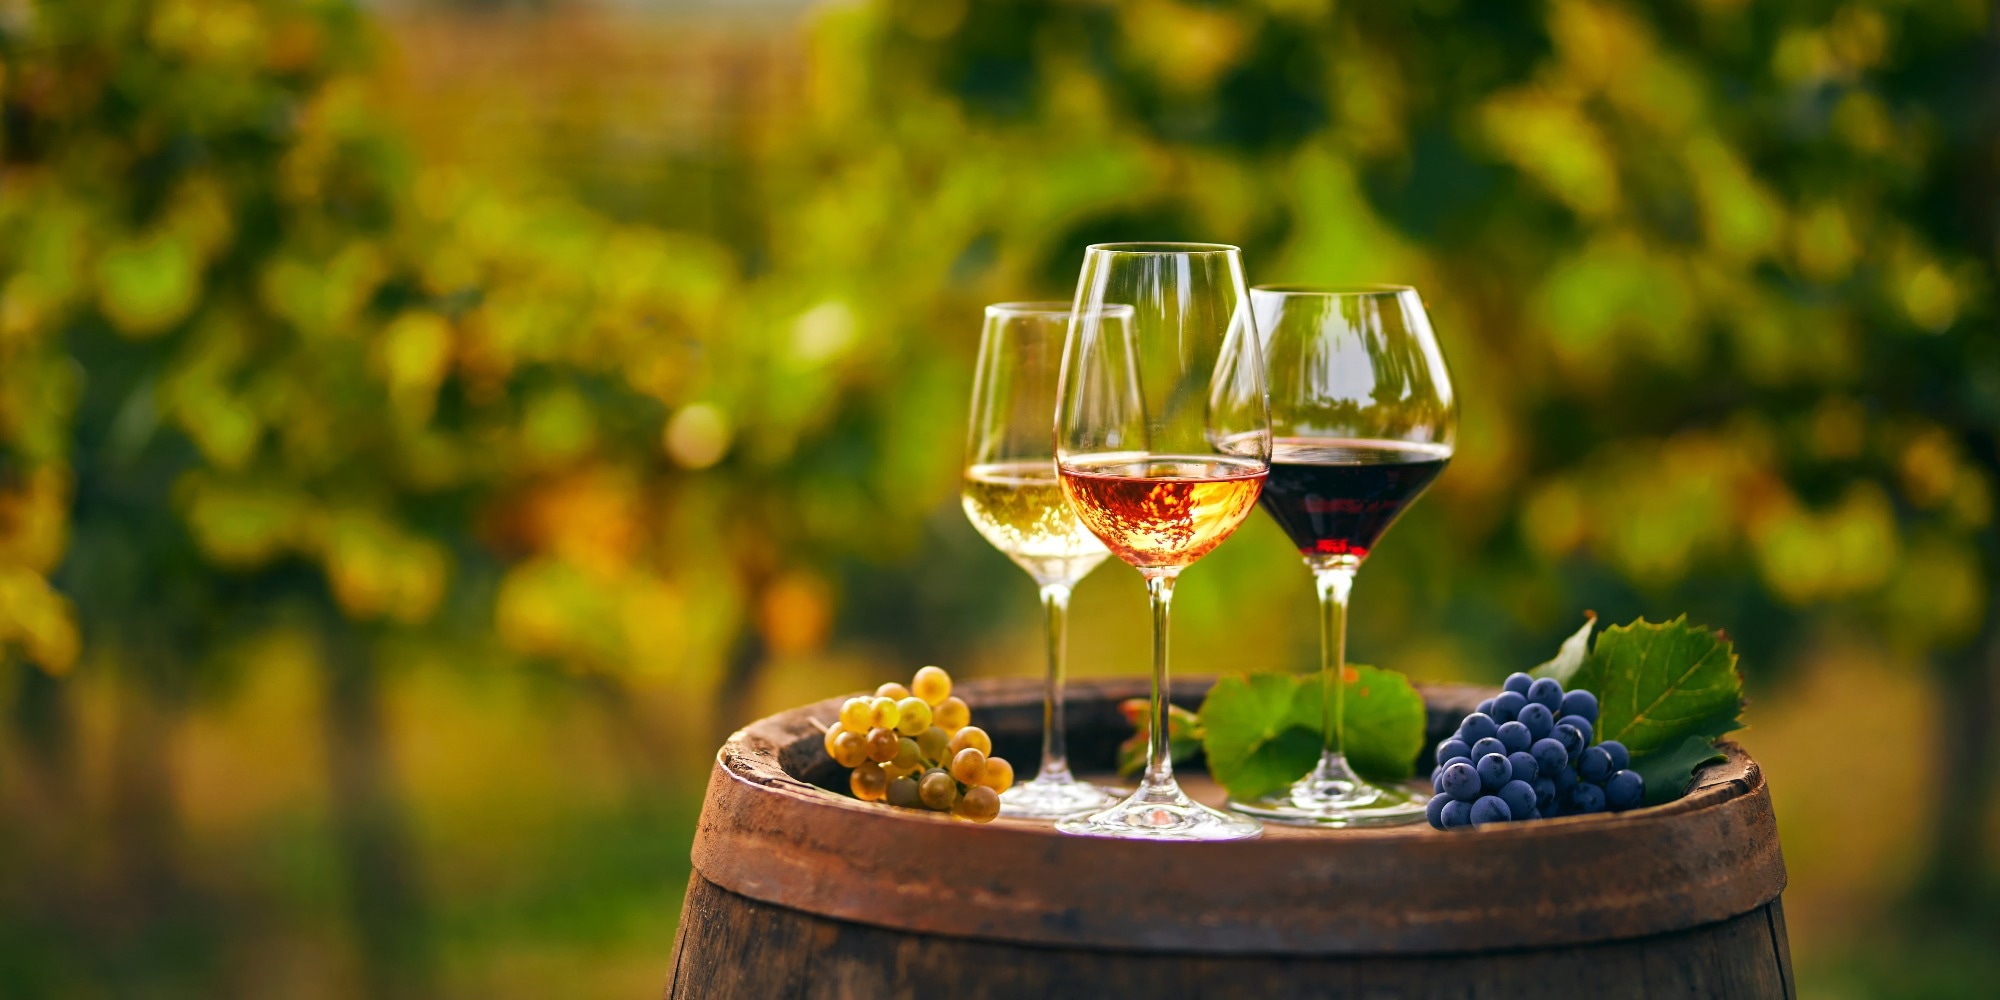 What are the well being advantages and meals business purposes of wine business by-products?